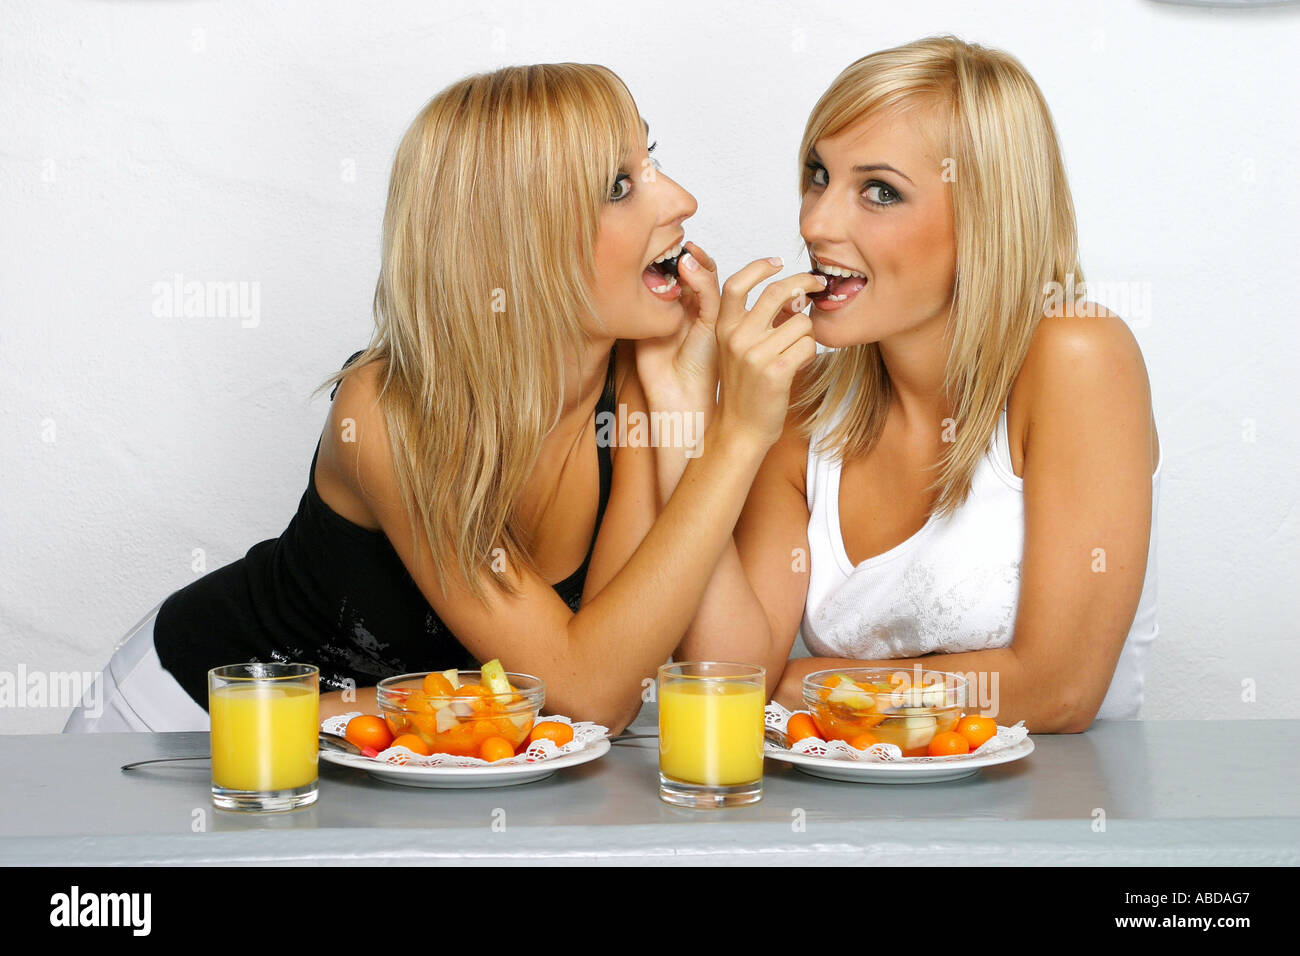 Blond twins feed themselves with fruit salad Stock Photo